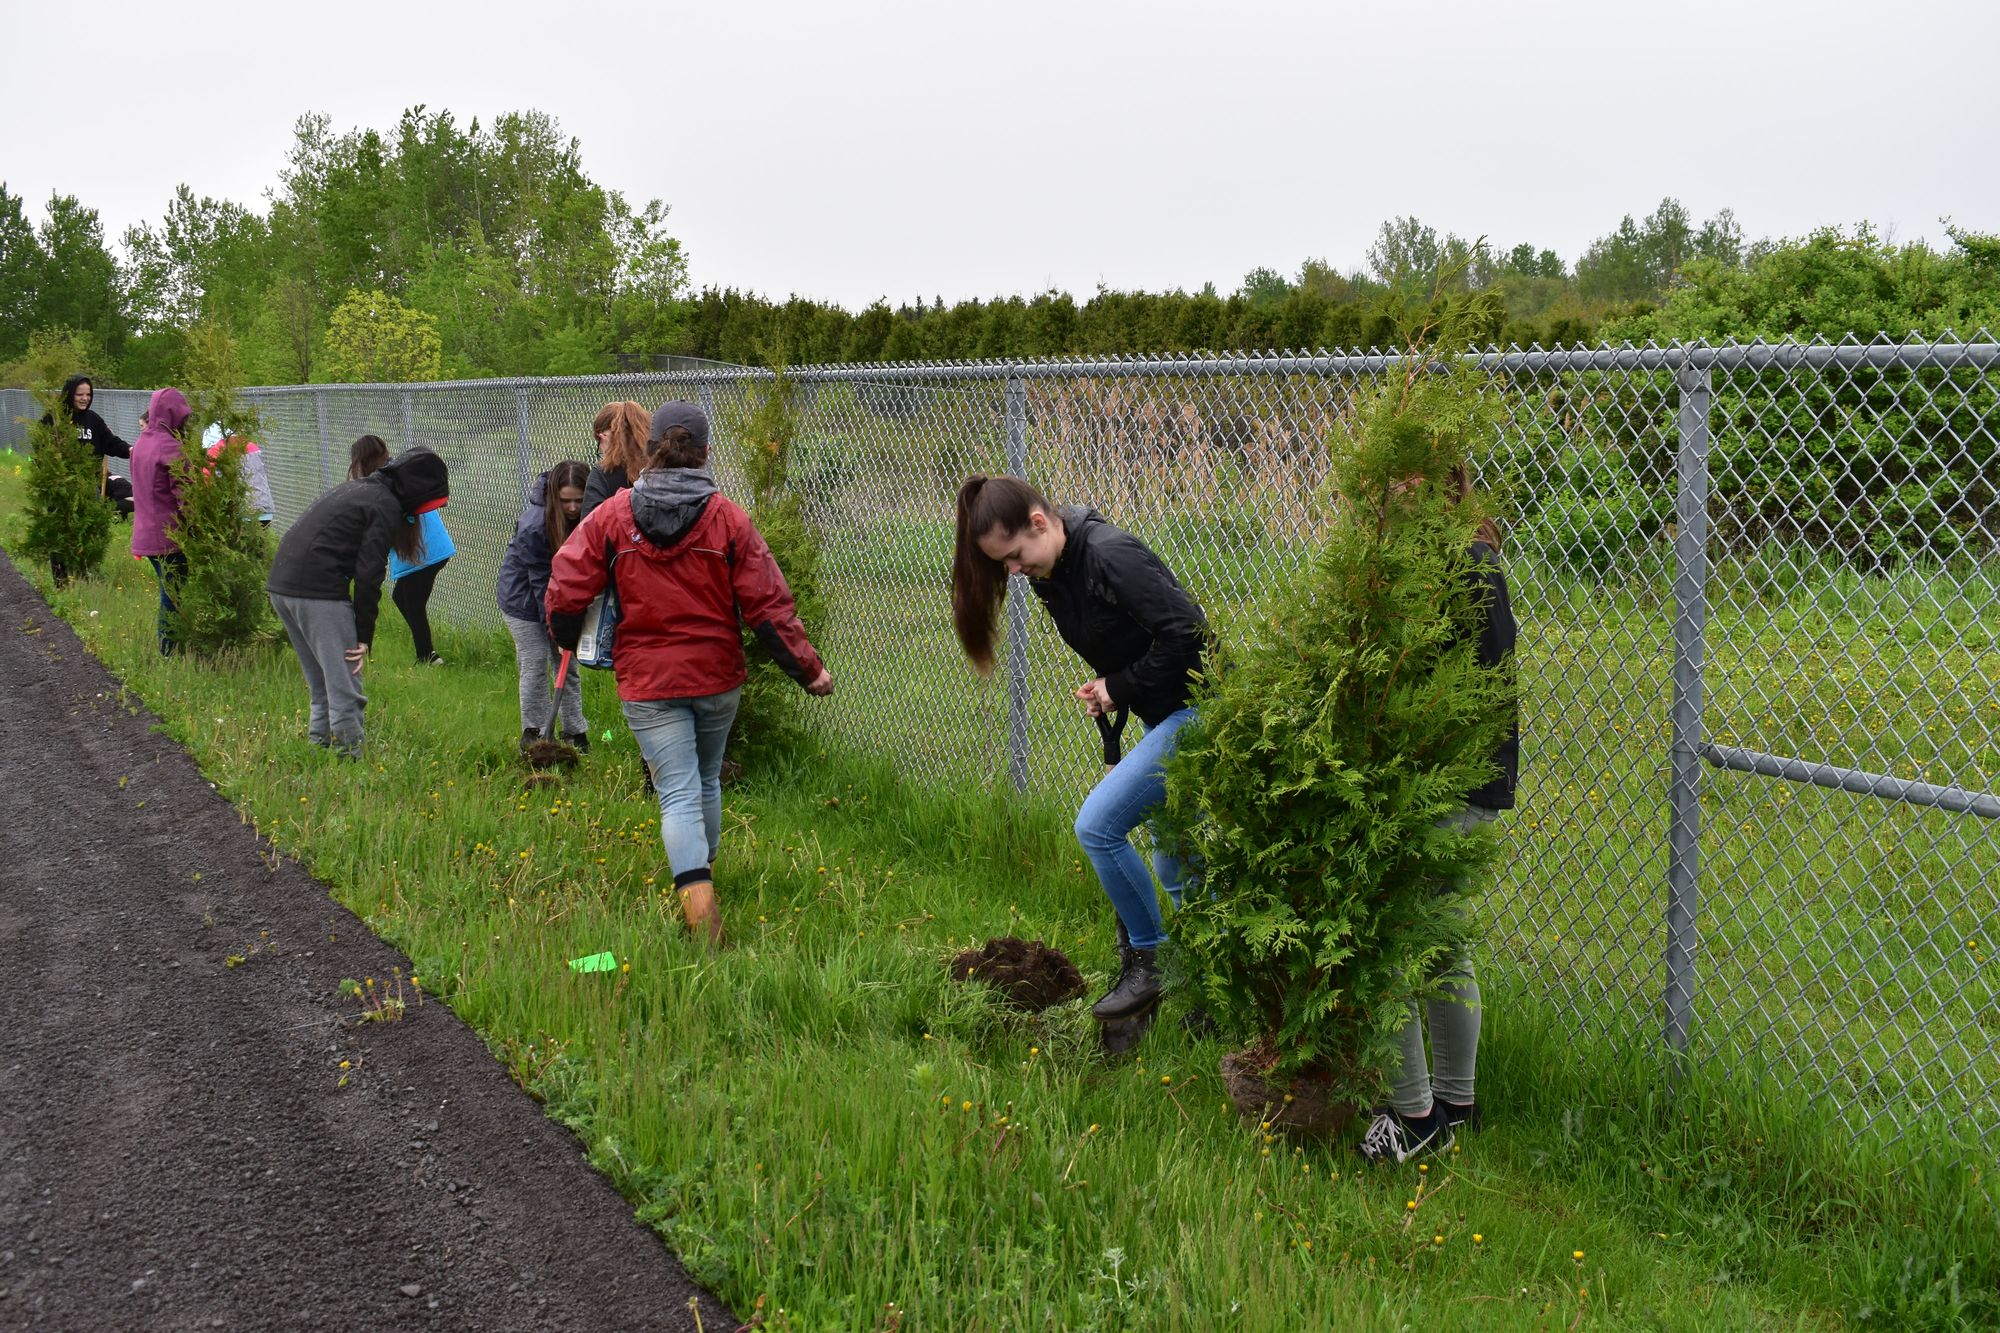 SNC delivers hands-on tree-planting experiences to watershed students